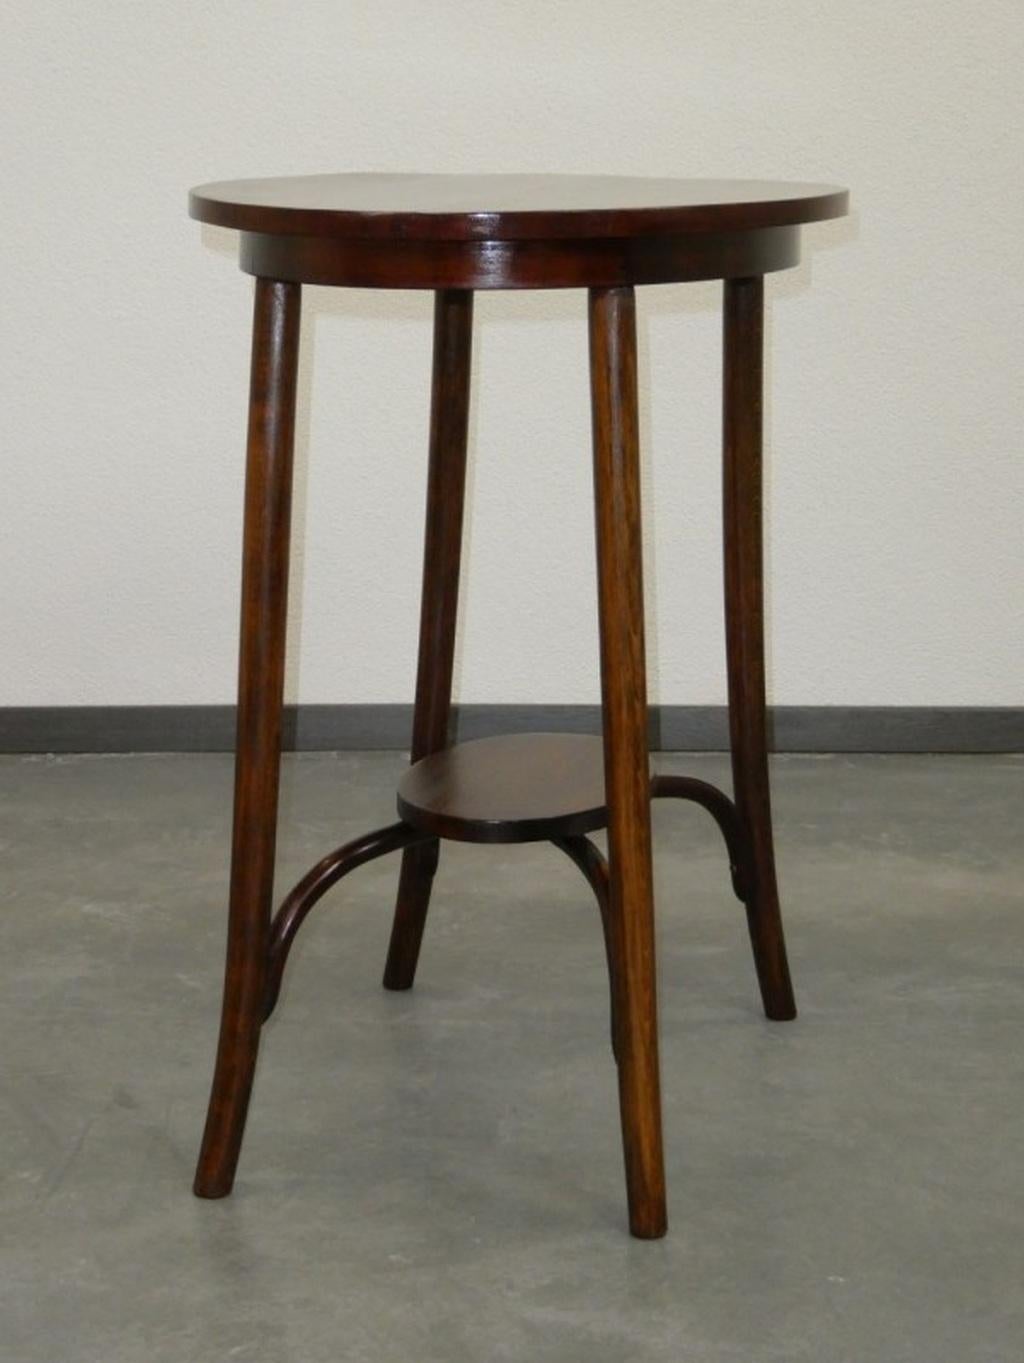 Oval side table by Thonet professionally stained and repolished.